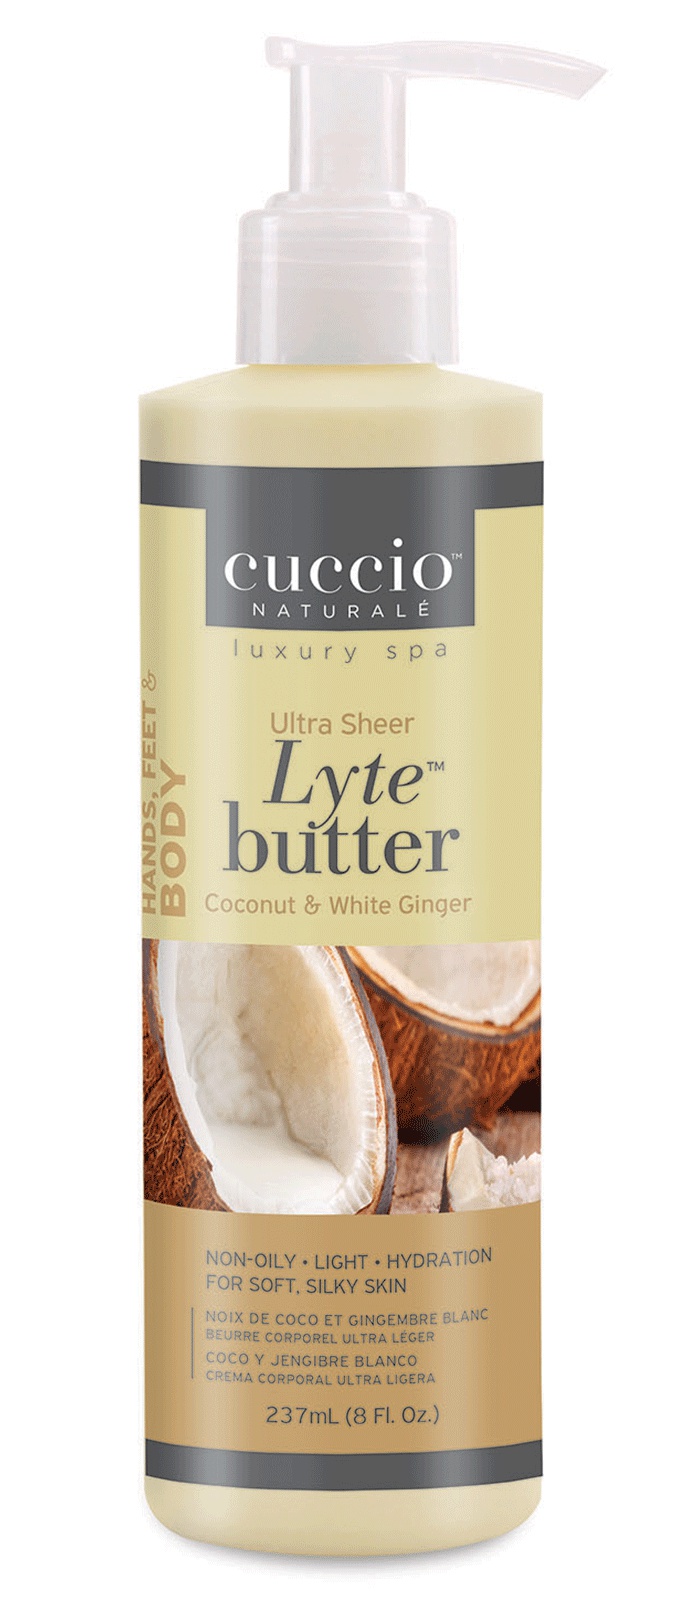 Cuccio Naturale Lyte Ultra Sheer Body Butter - Coconut & White Ginger